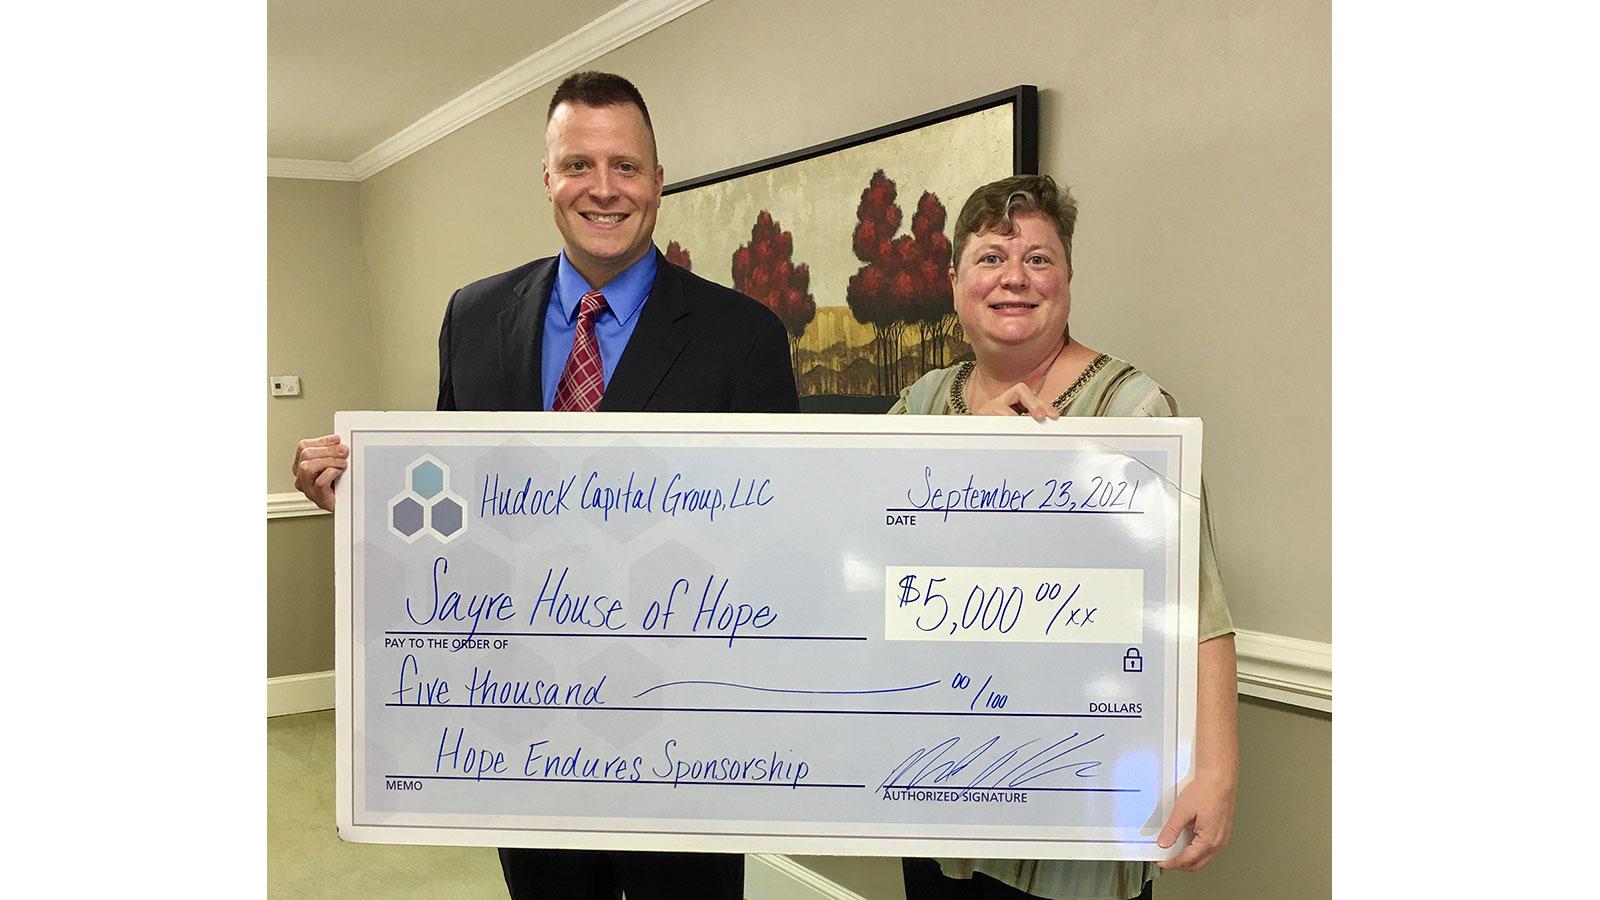 $5,000 Donation to Hope Endures Campaign 